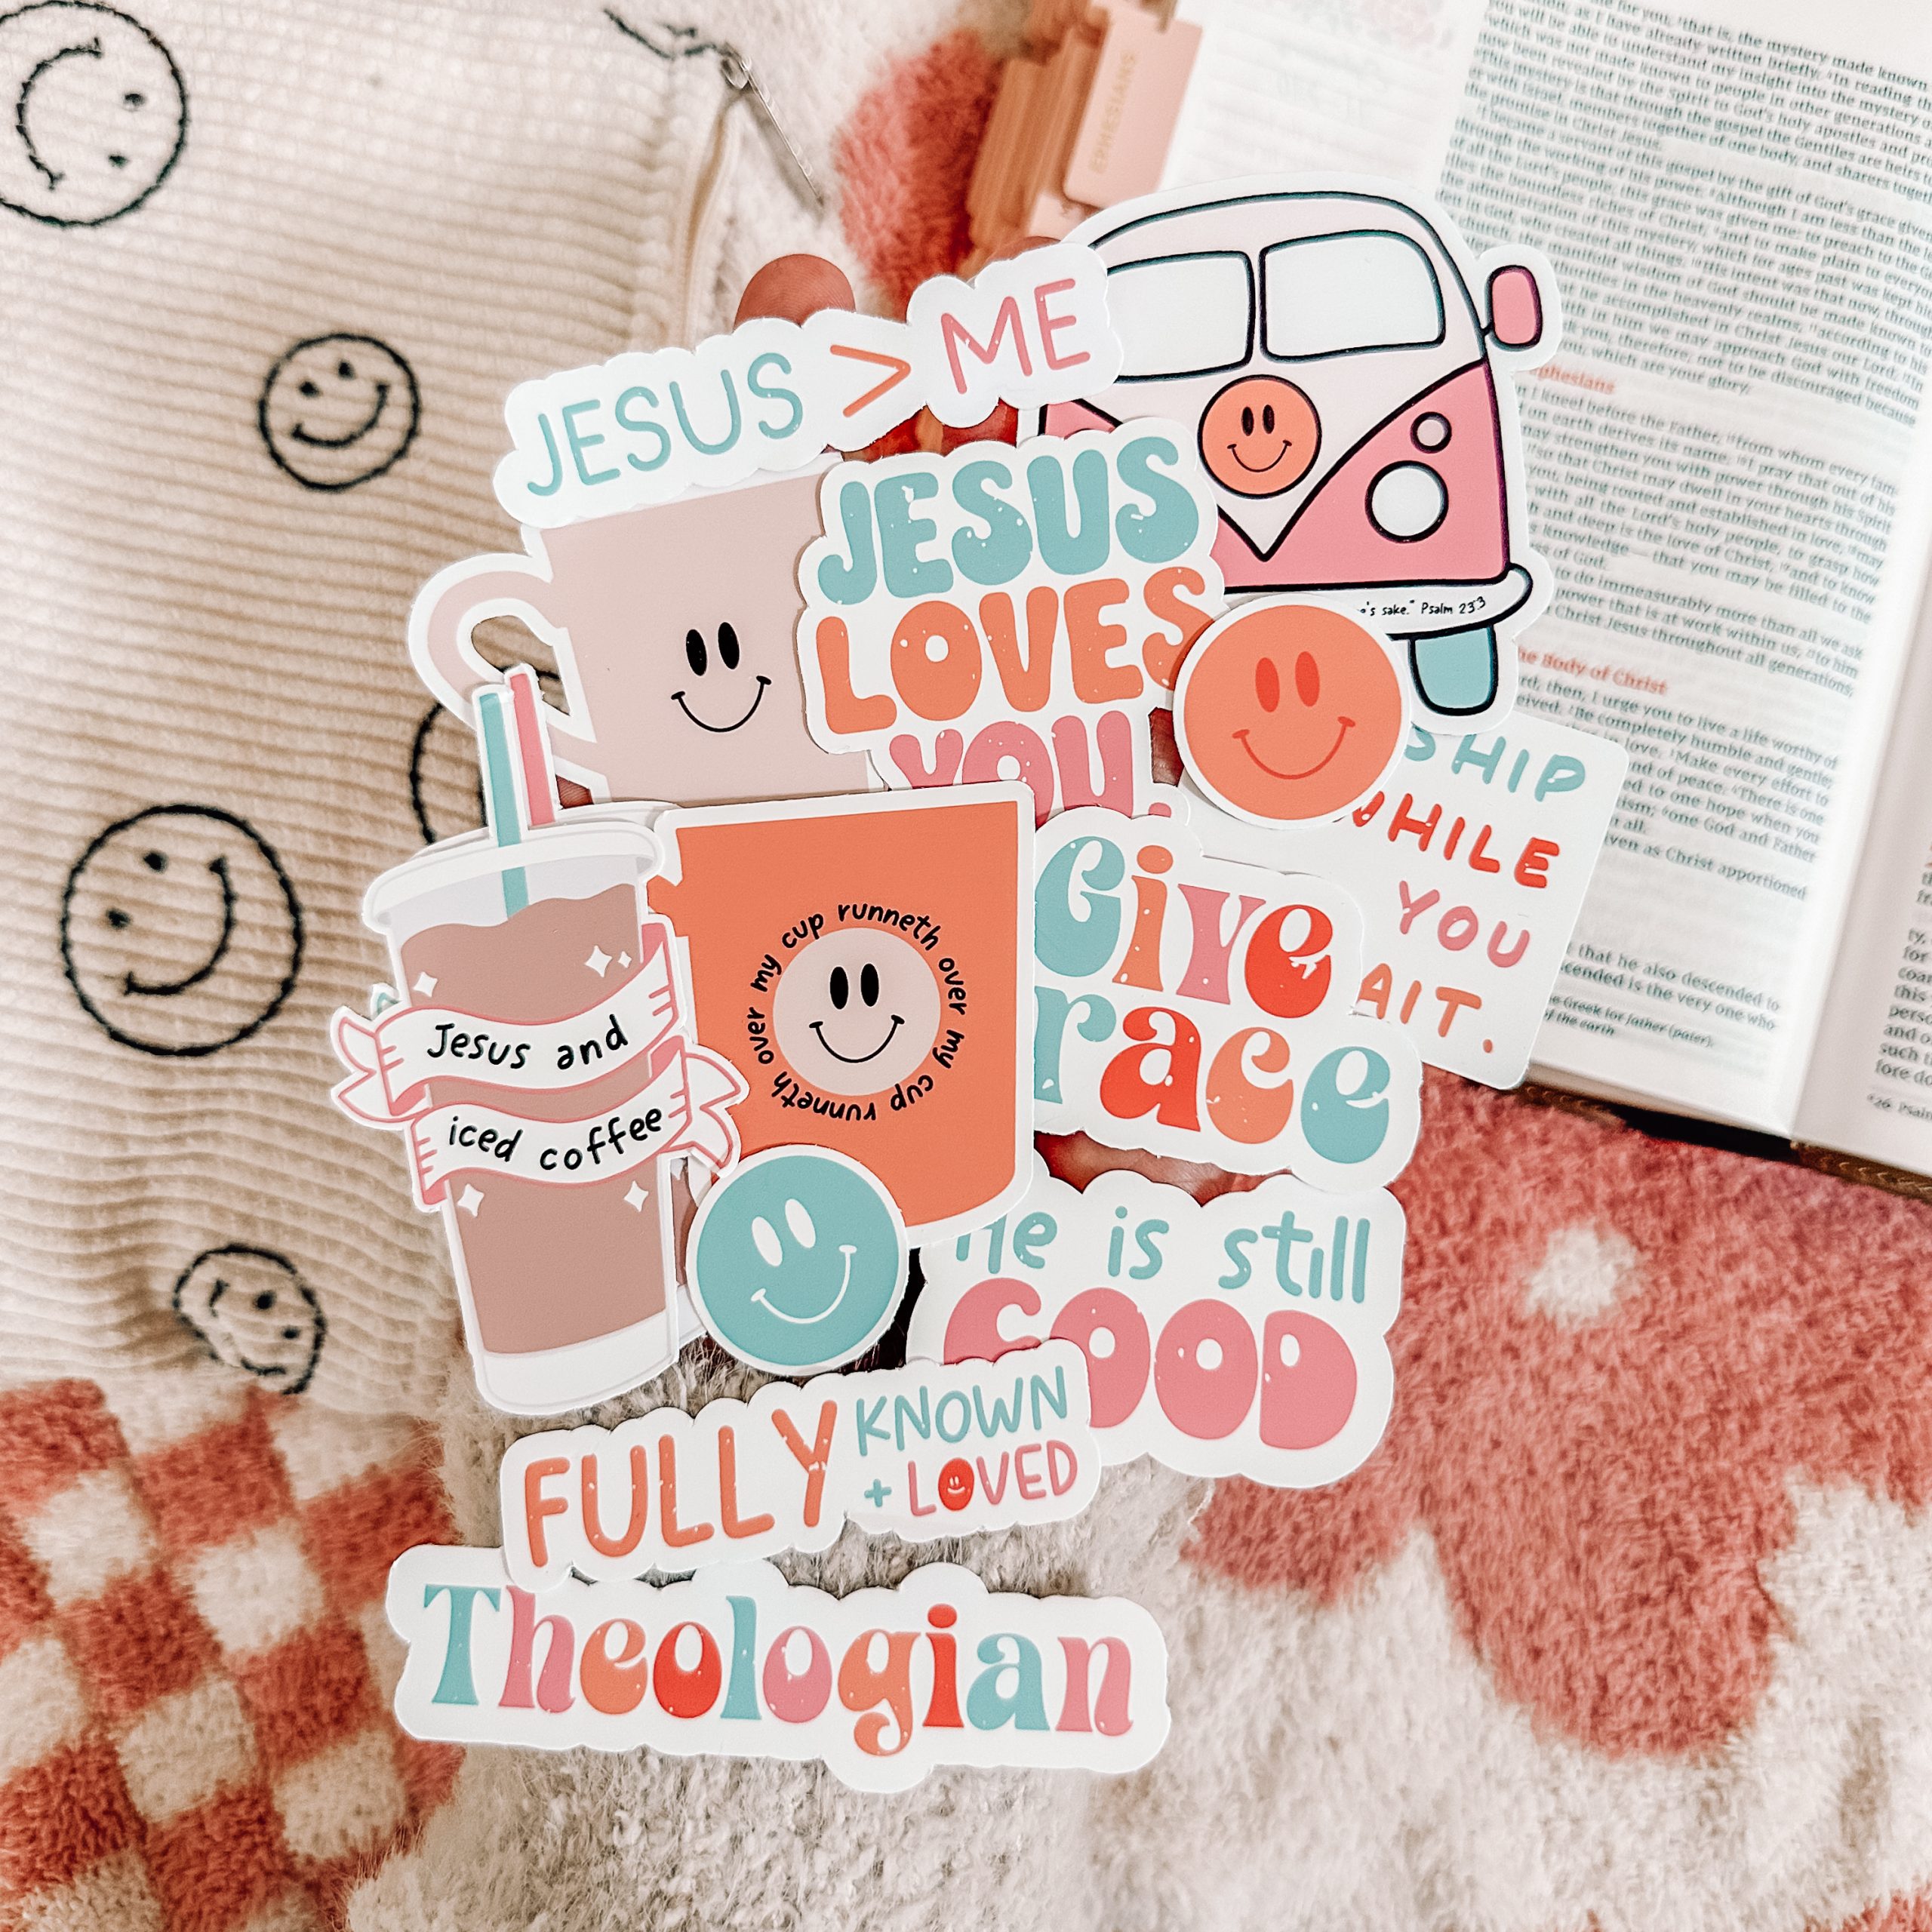 Religious Stickers Religious Sticker Bundle Bible Stickers Printable  Stickers Religious Christian Stickers Print and Cut 